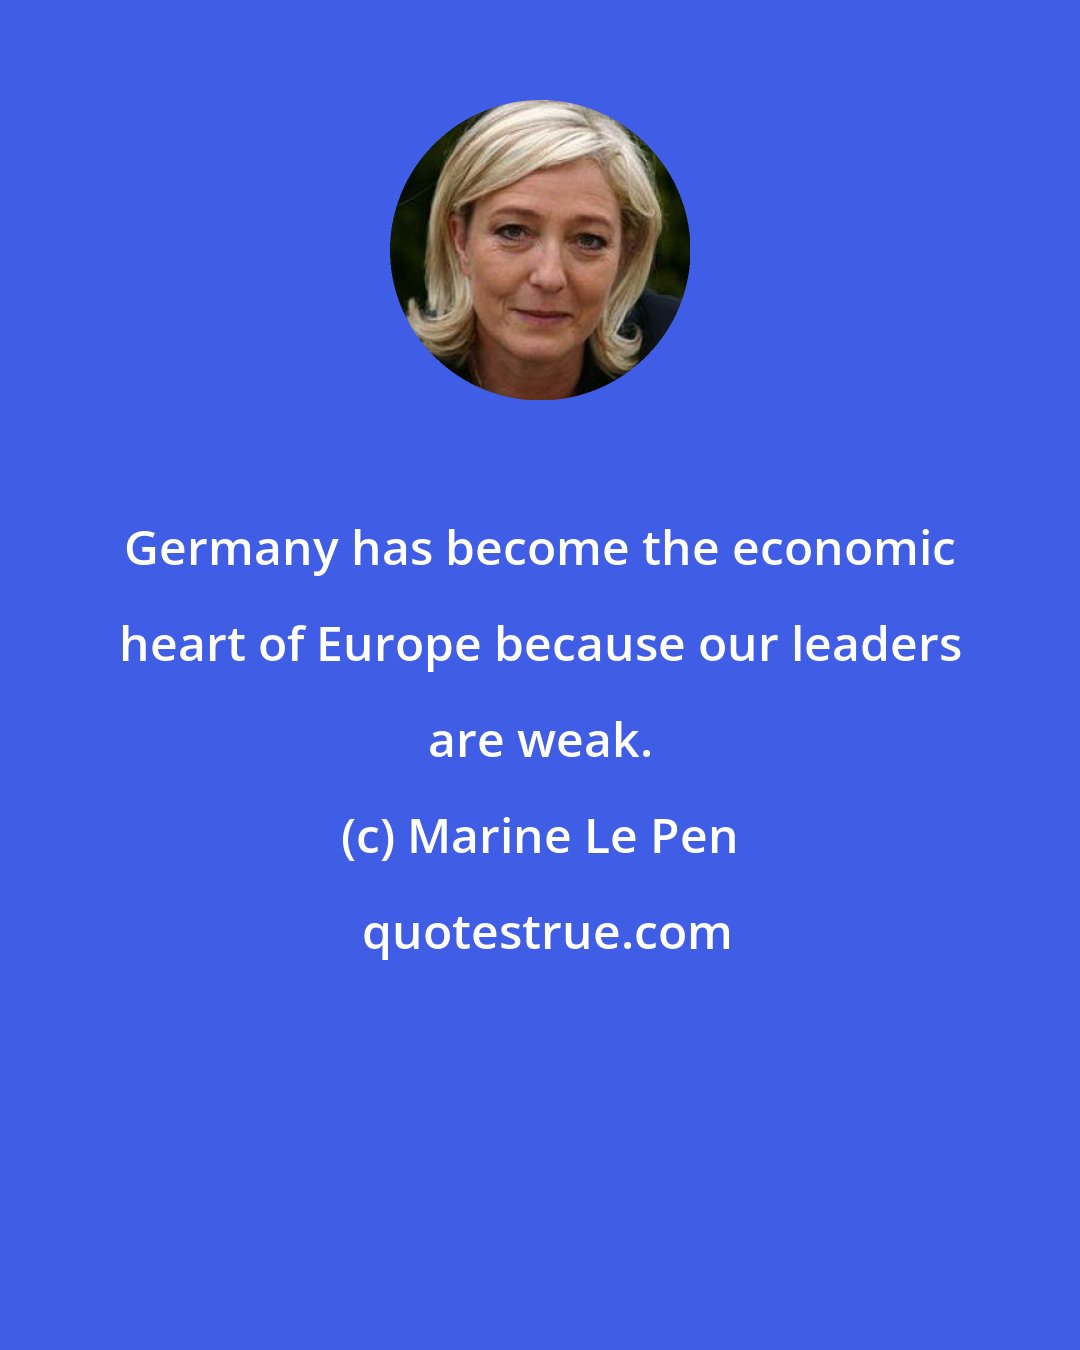 Marine Le Pen: Germany has become the economic heart of Europe because our leaders are weak.